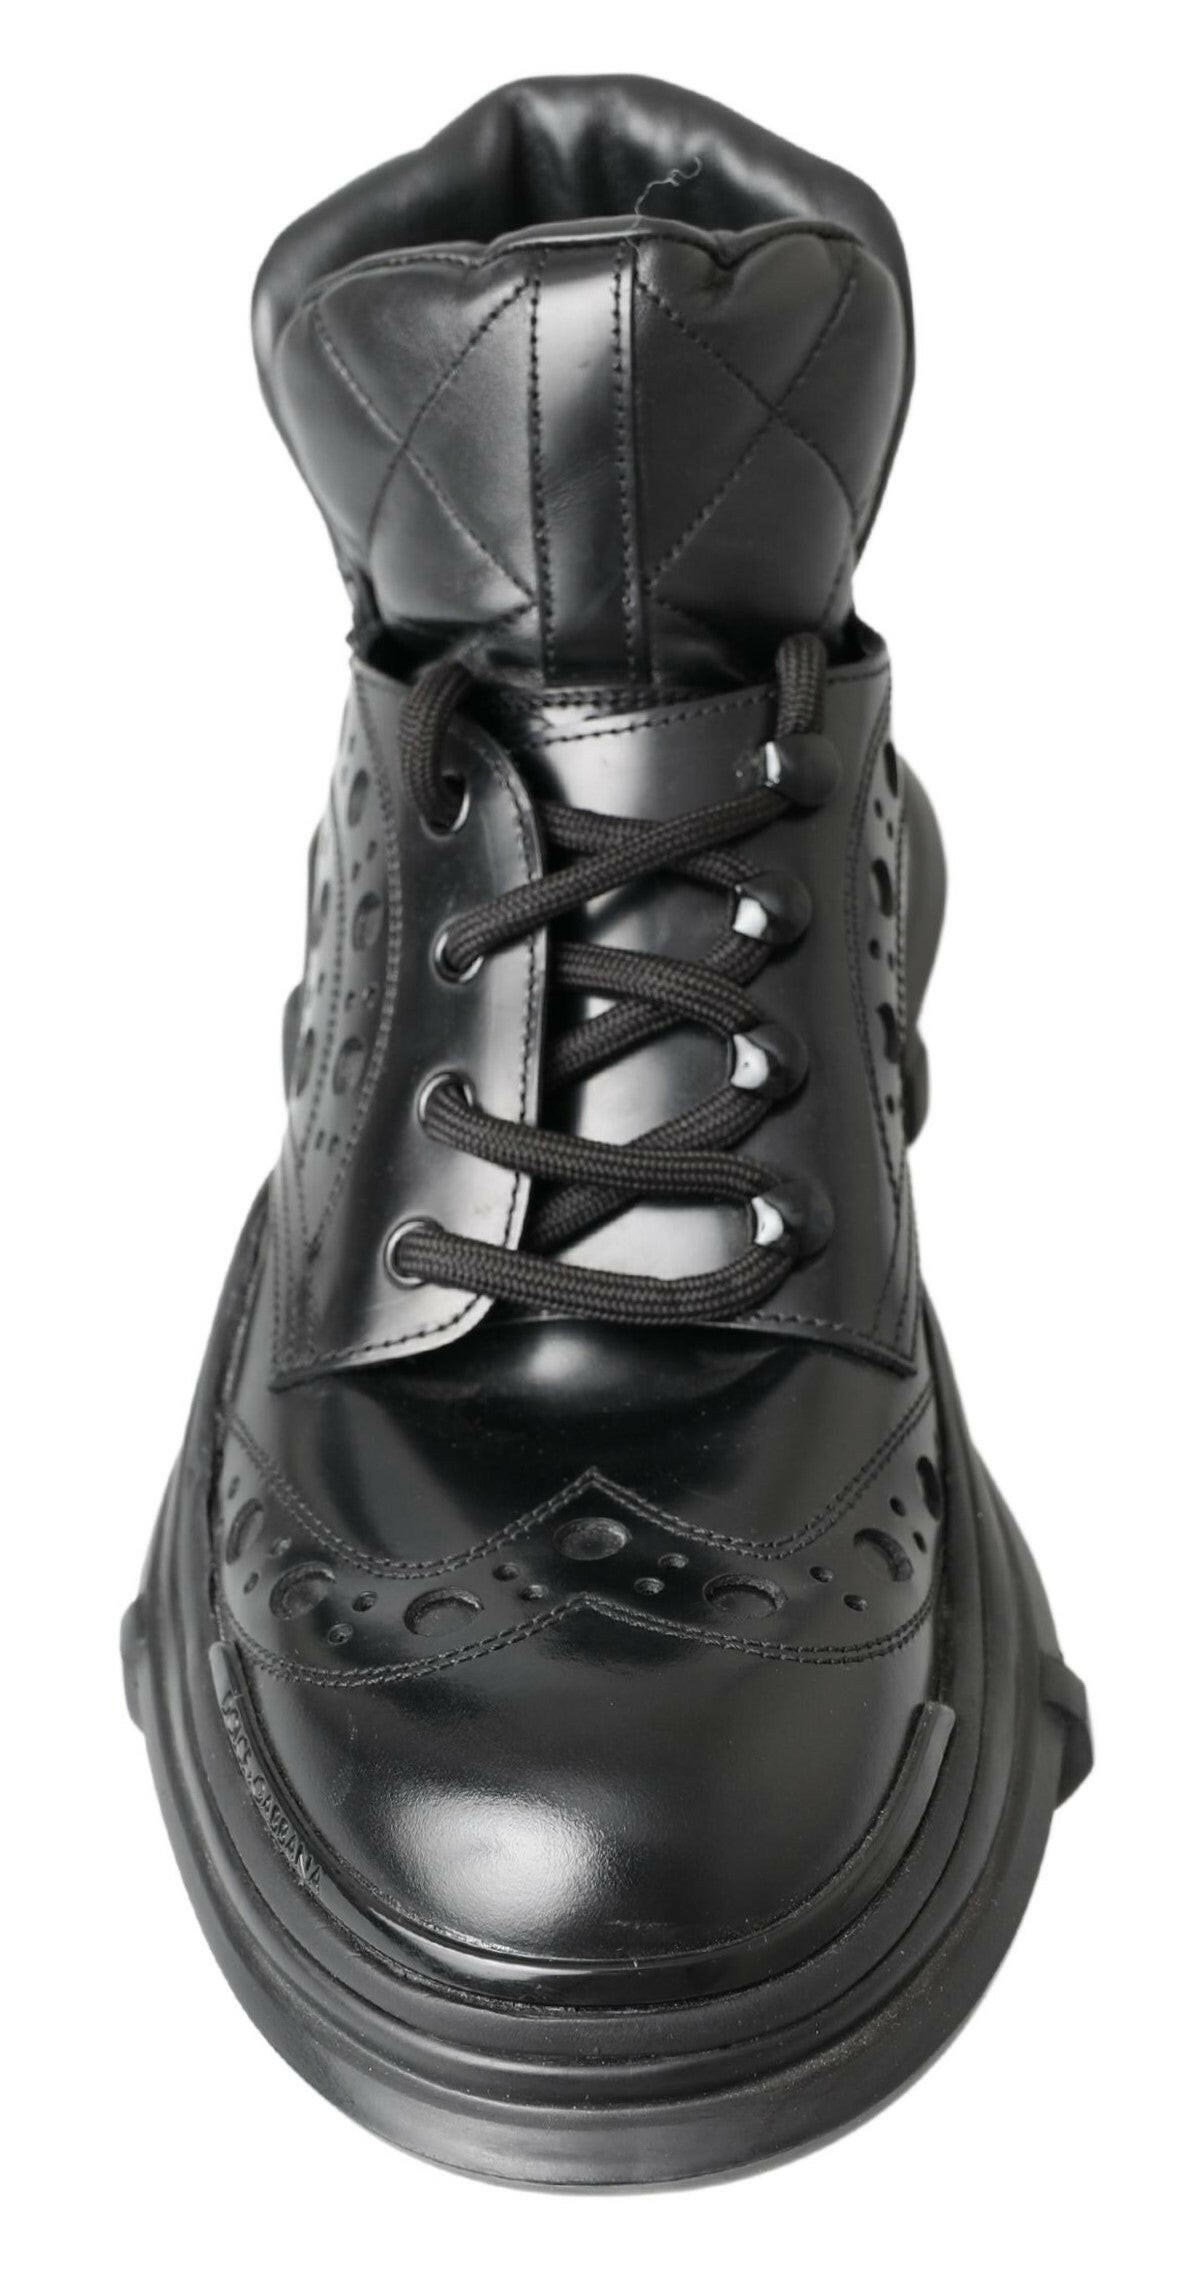 Dolce & Gabbana Black Leather Ankle Casual Boots - GENUINE AUTHENTIC BRAND LLC  